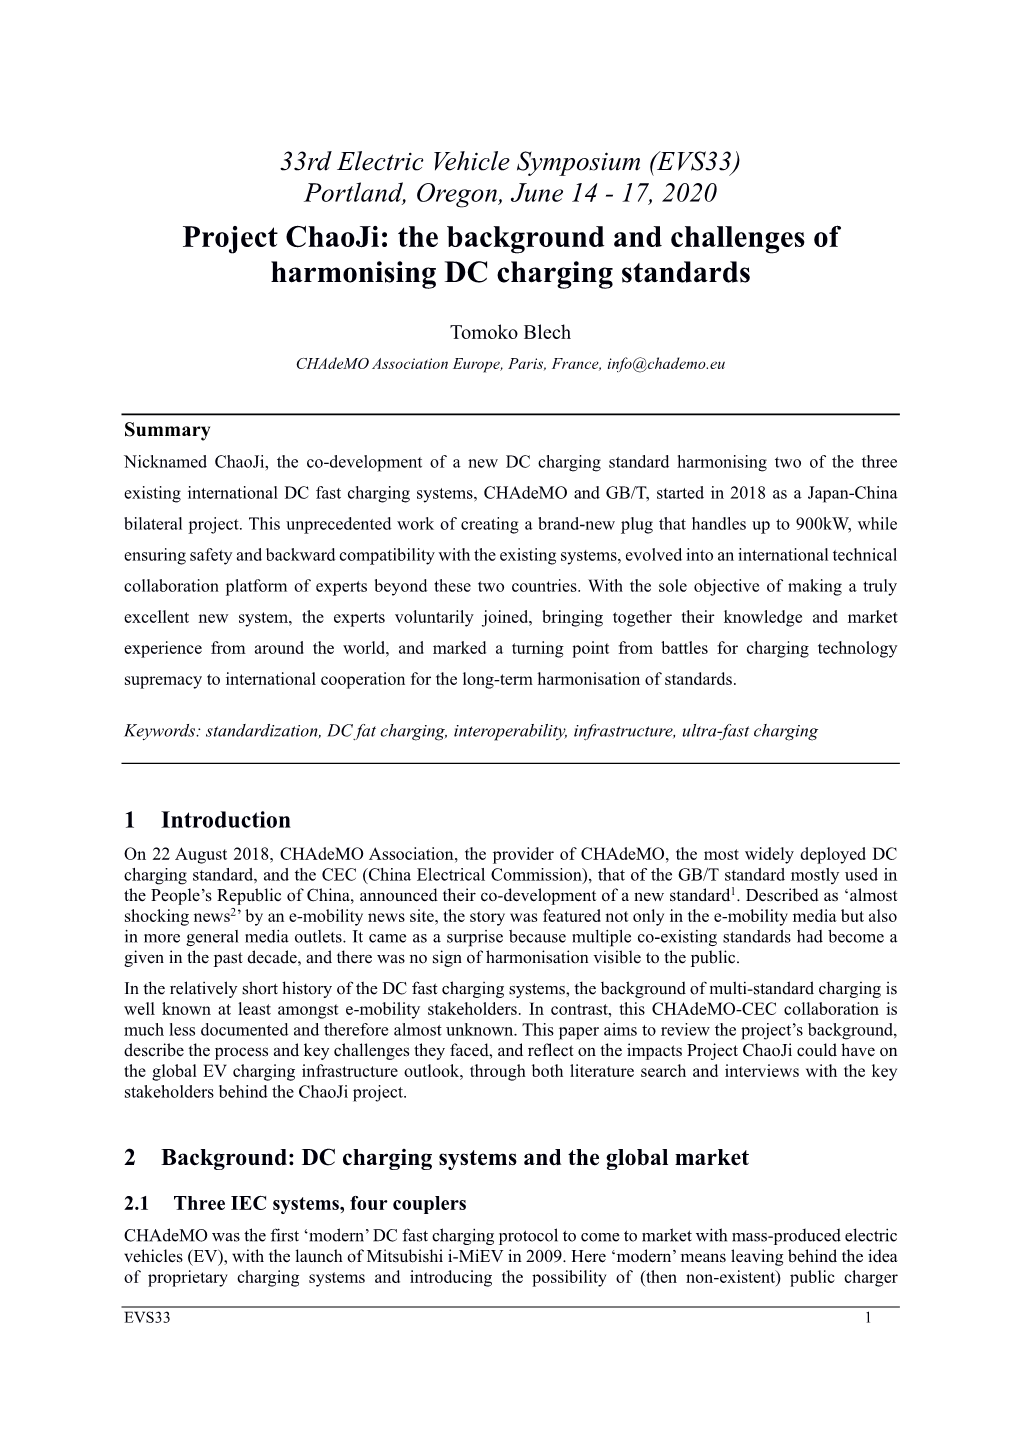 Project Chaoji: the Background and Challenges of Harmonising DC Charging Standards